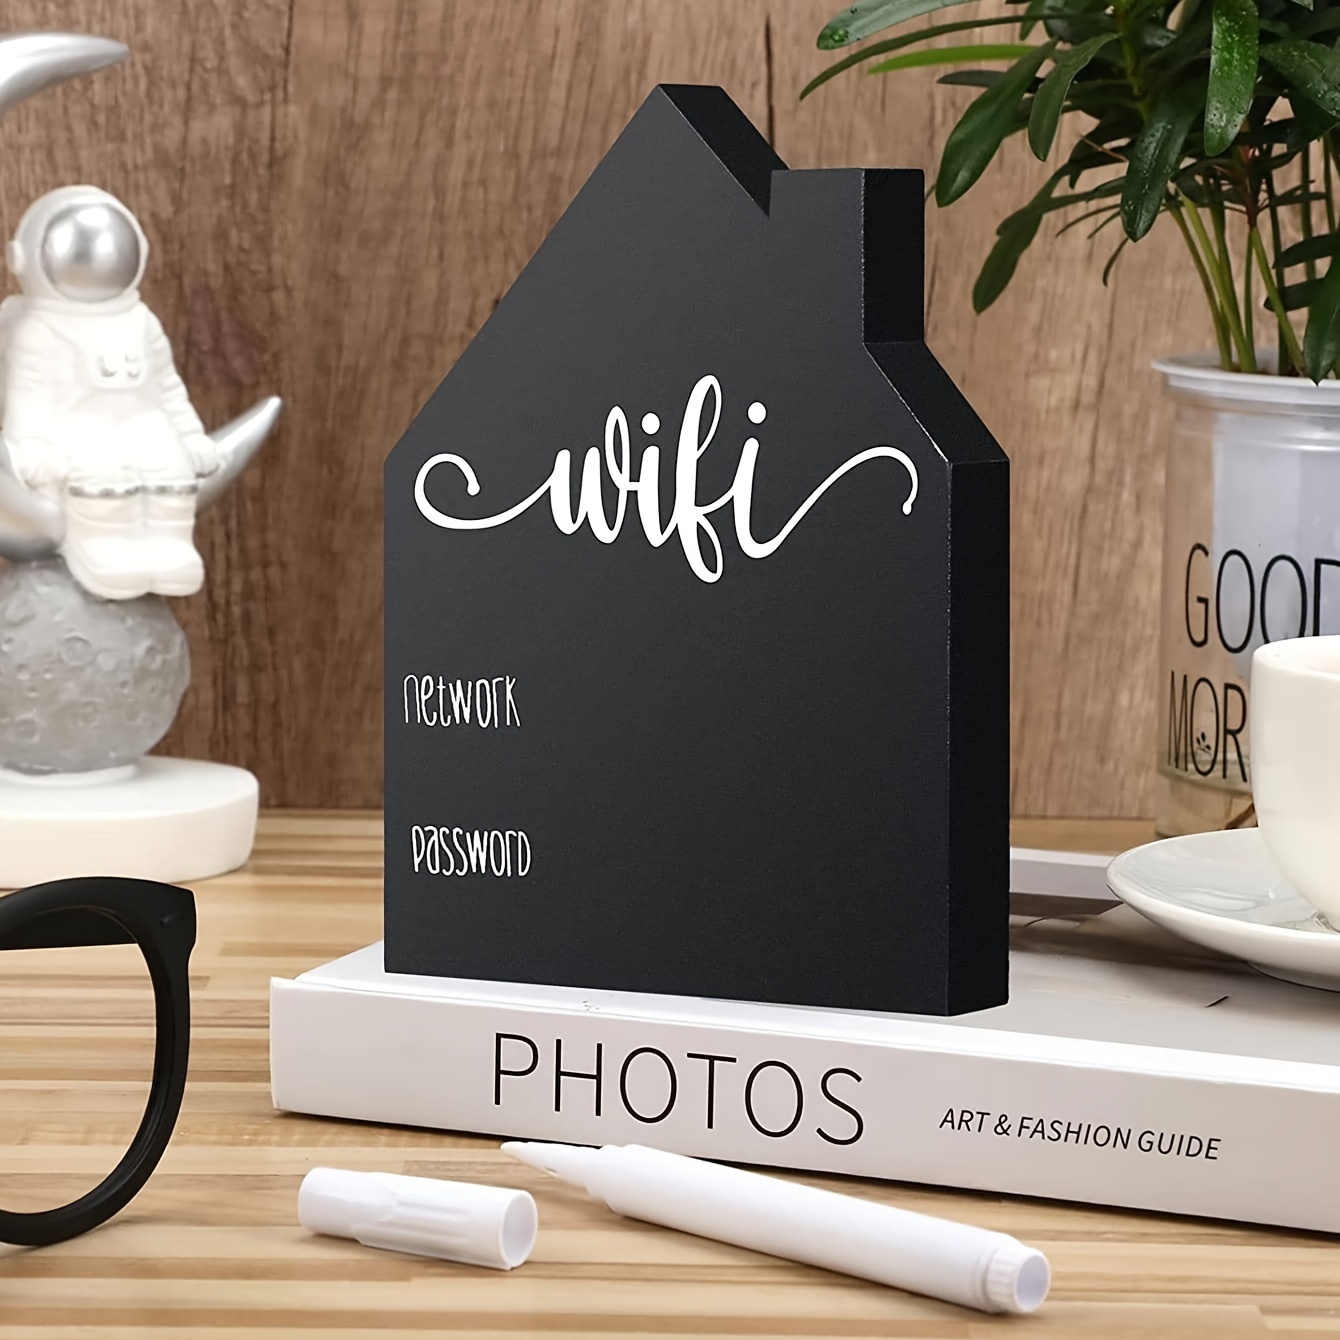 

1pc Contemporary Style Wooden Wifi Password Sign Board, Freestanding Mini House Chalkboard For Restaurant Hotel Home Decor, Erasable Network Credentials Display, Pen Not Included